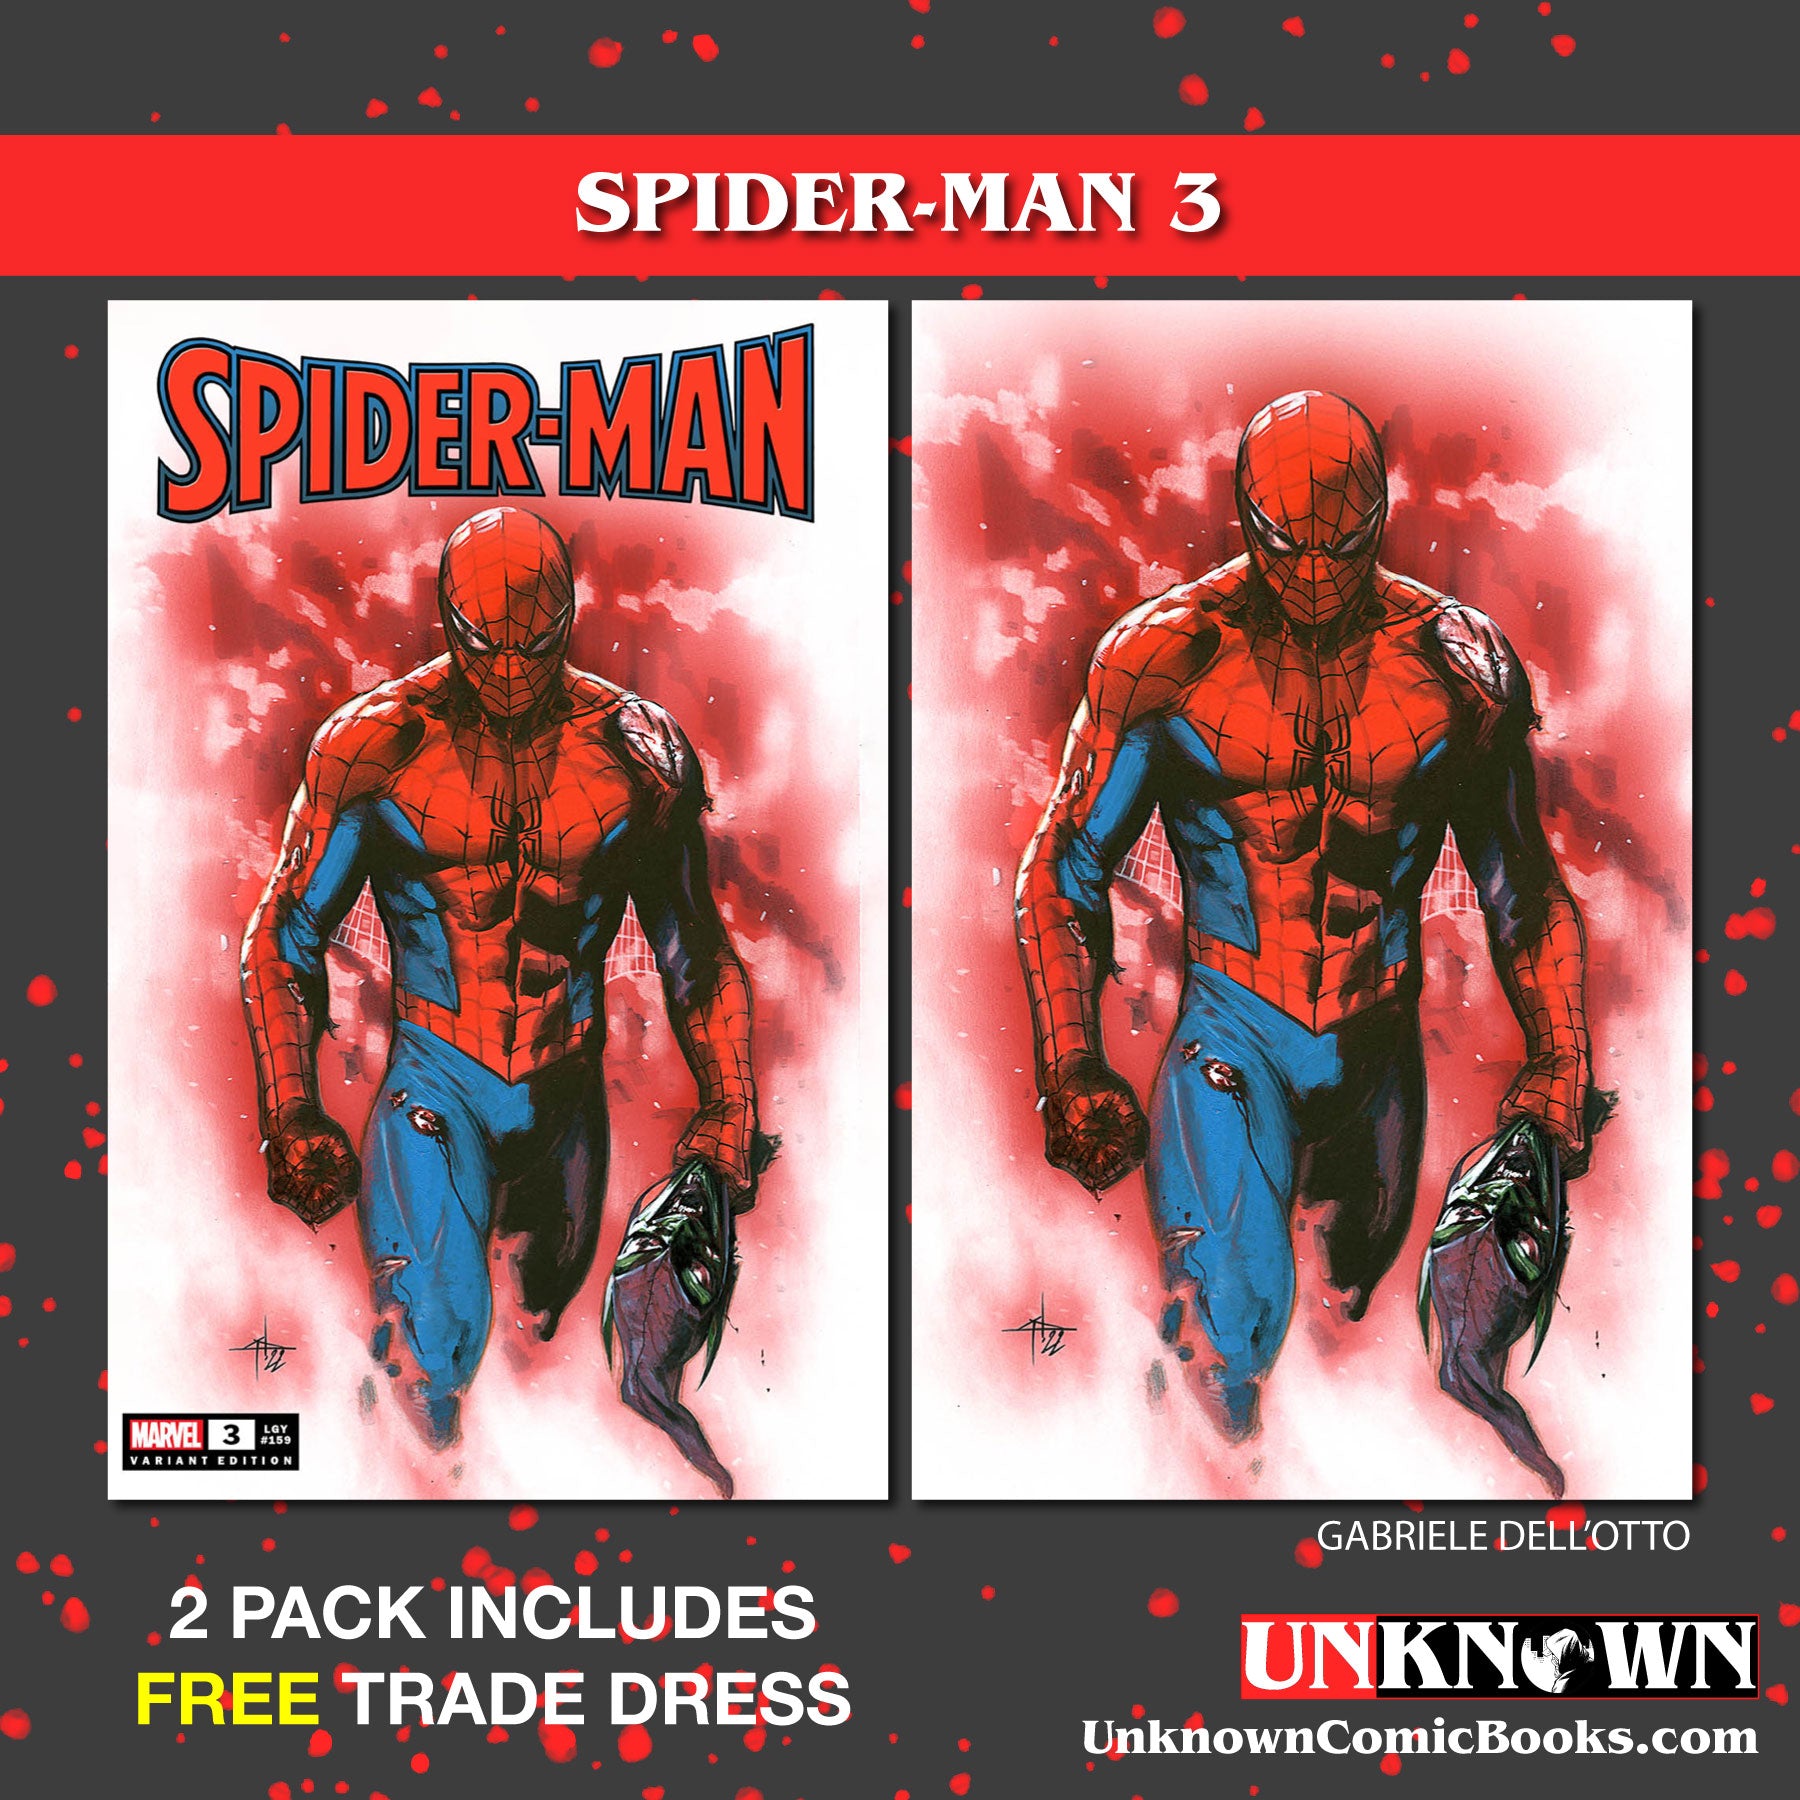 2 PACK **FREE TRADE DRESS** SPIDER-MAN #3 UNKNOWN COMICS DELL'OTTO EXCLUSIVE VAR (12/07/2022)